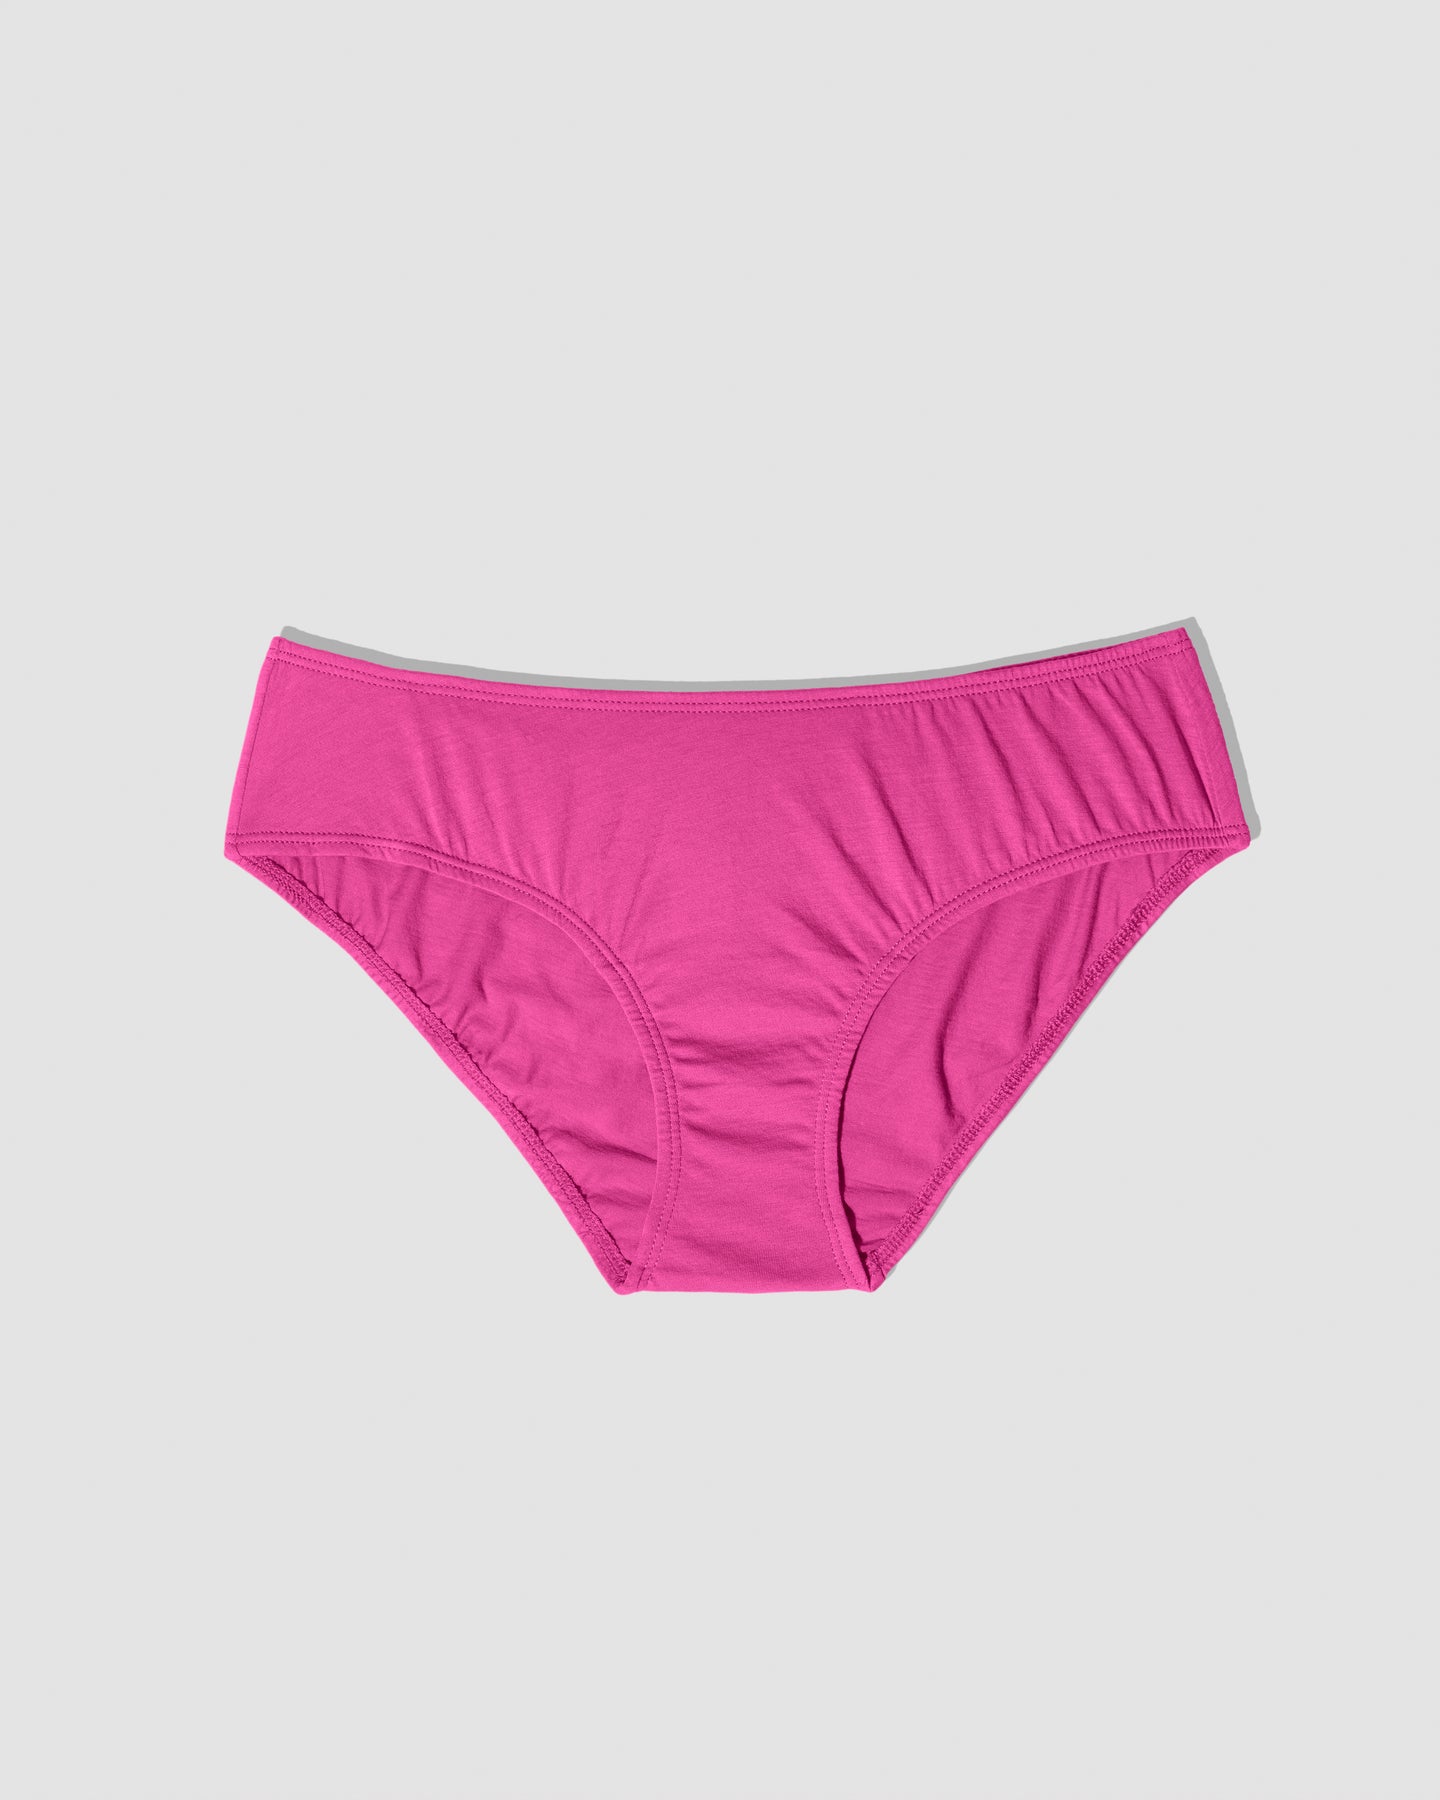 The Most Expensive Pair of Underwear I Ever Bought • Sassypants Design